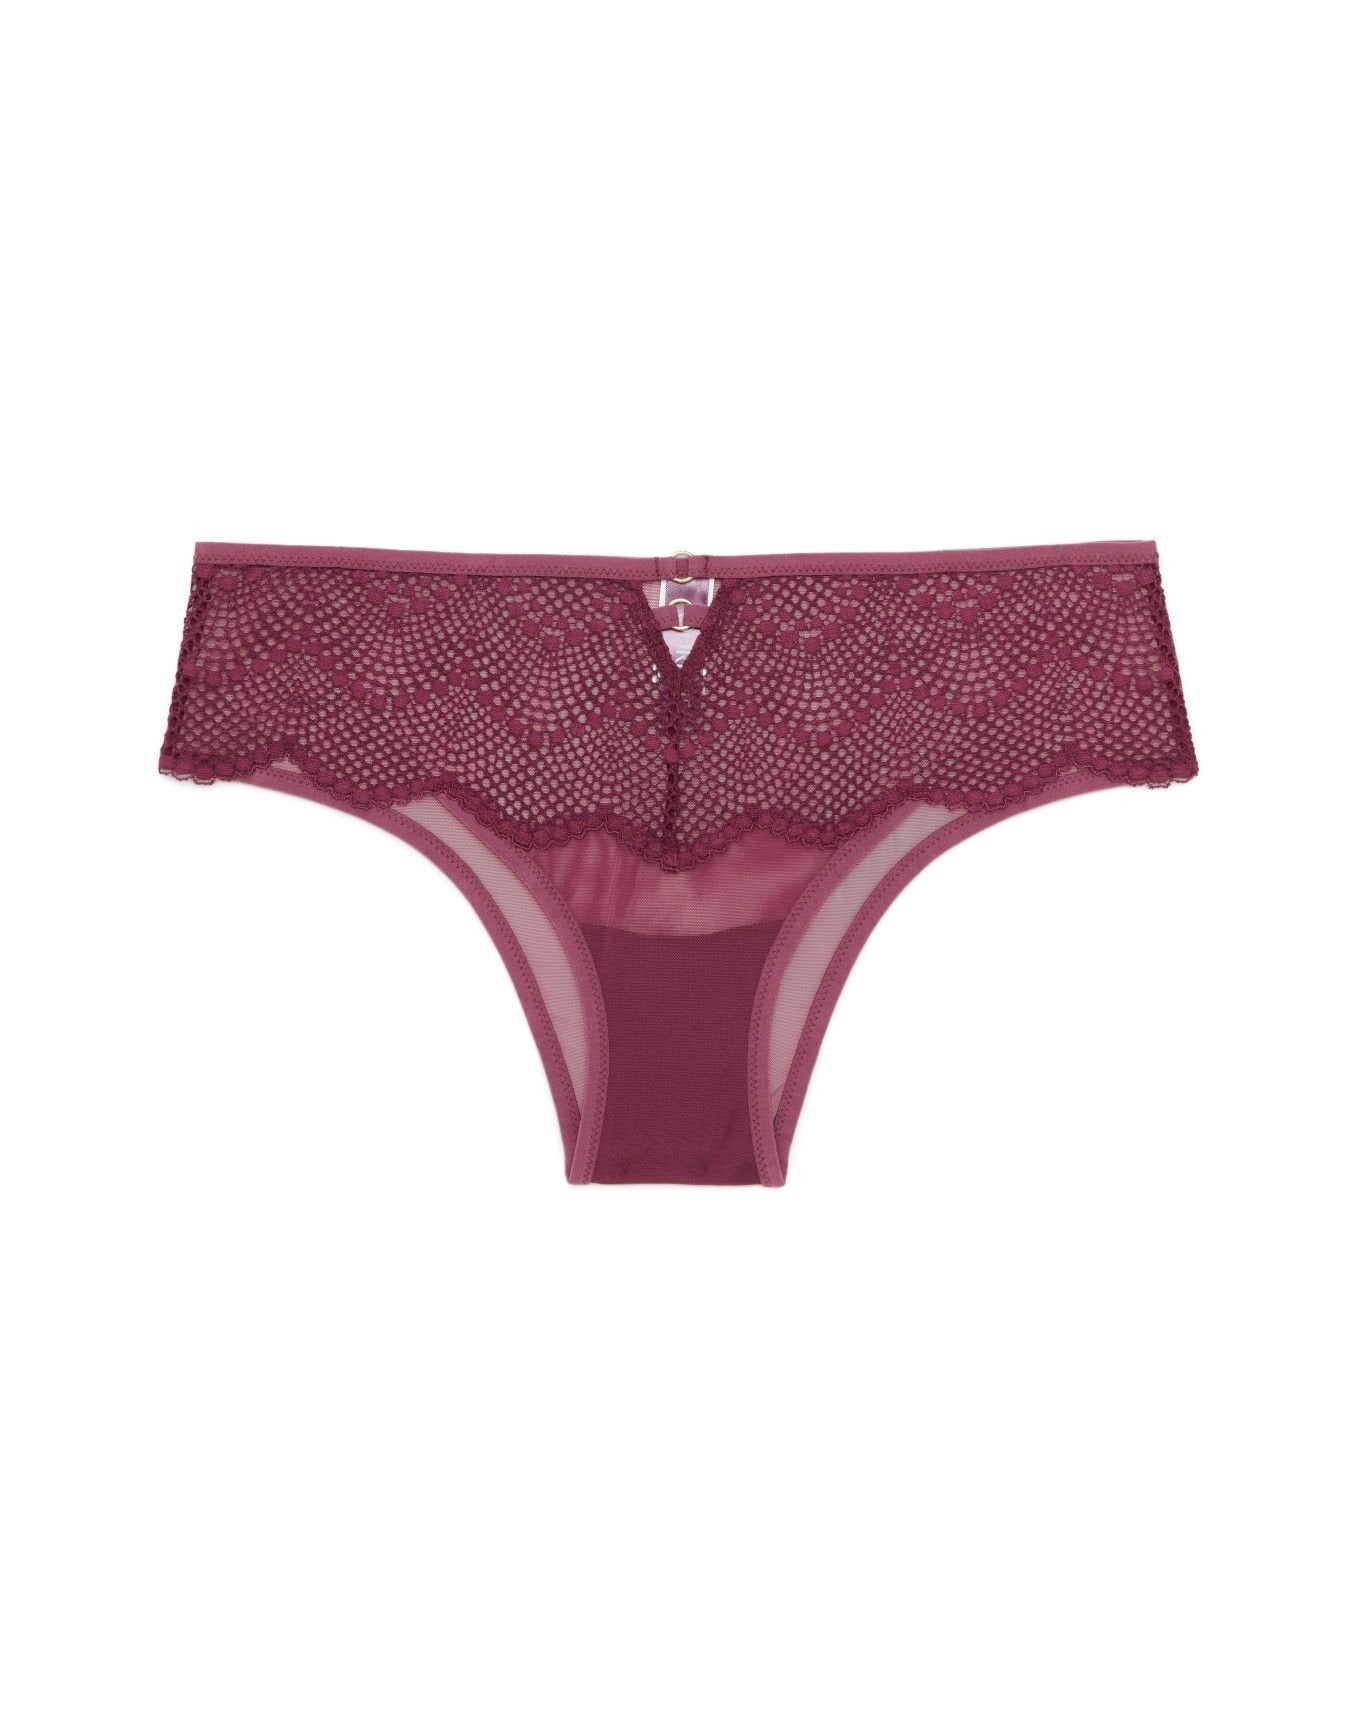 Adore Me Margaritte Cheeky in color Grape Wine and shape cheeky